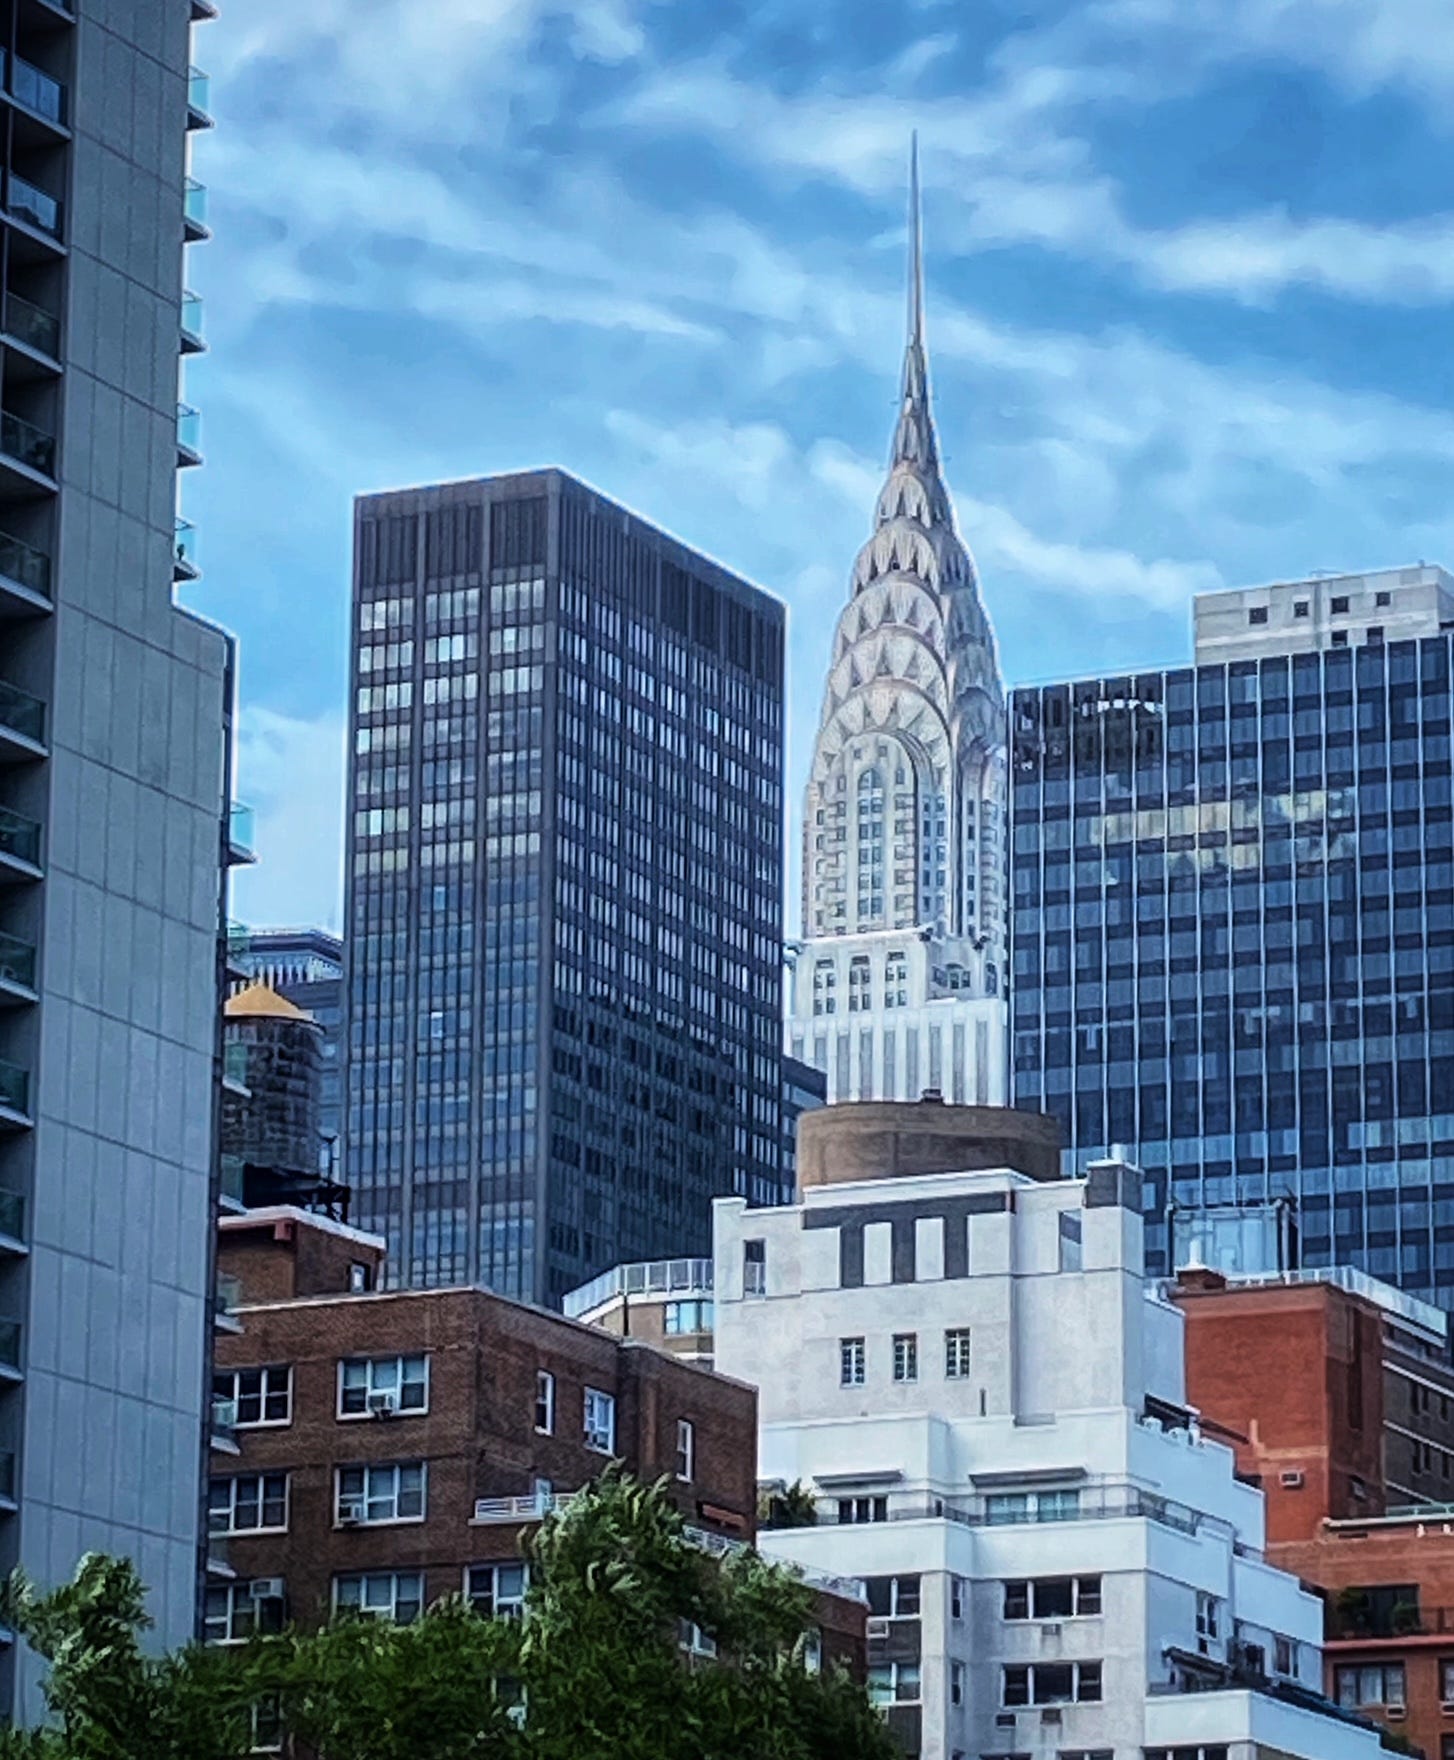 A water tower is visible on a roof between taller buildings. Also visible in the gap between office buildings is the Chrysler Building.